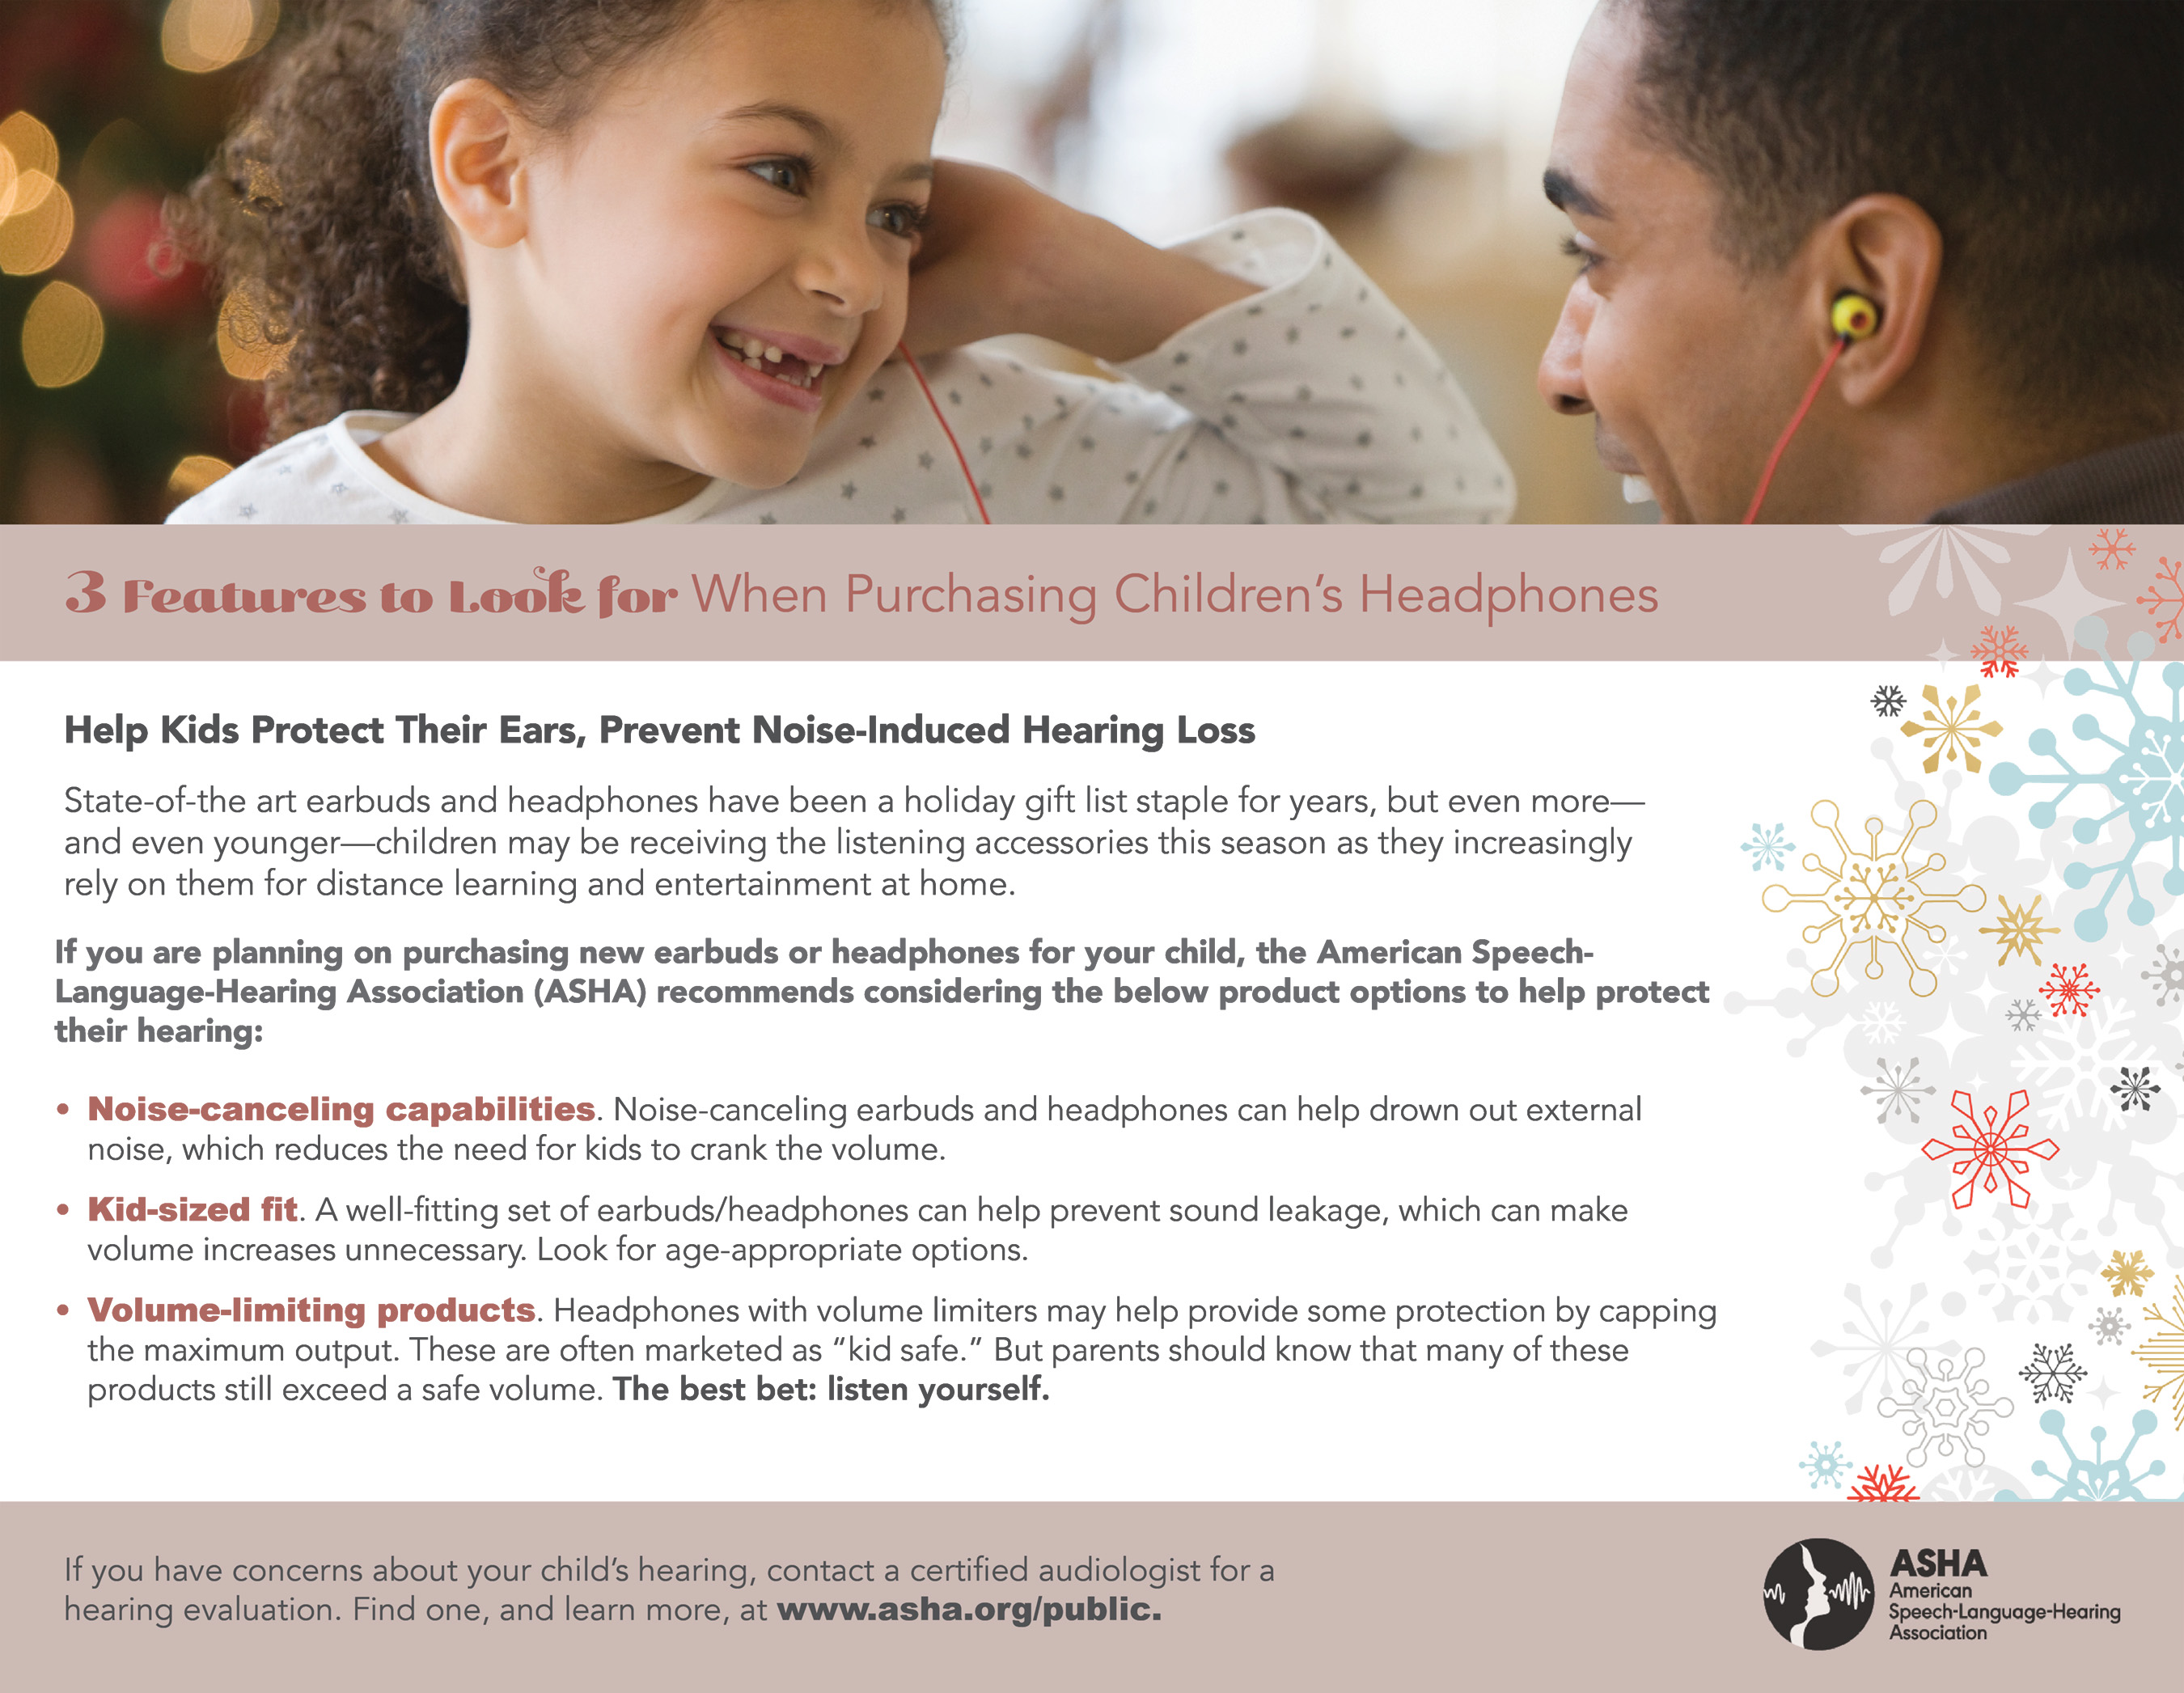 Giving the Gift of Hearing Protection: ASHA Offers Tips for Smart Shopping, Safe Listening When Headphones Are on a Child's Holiday Wish List